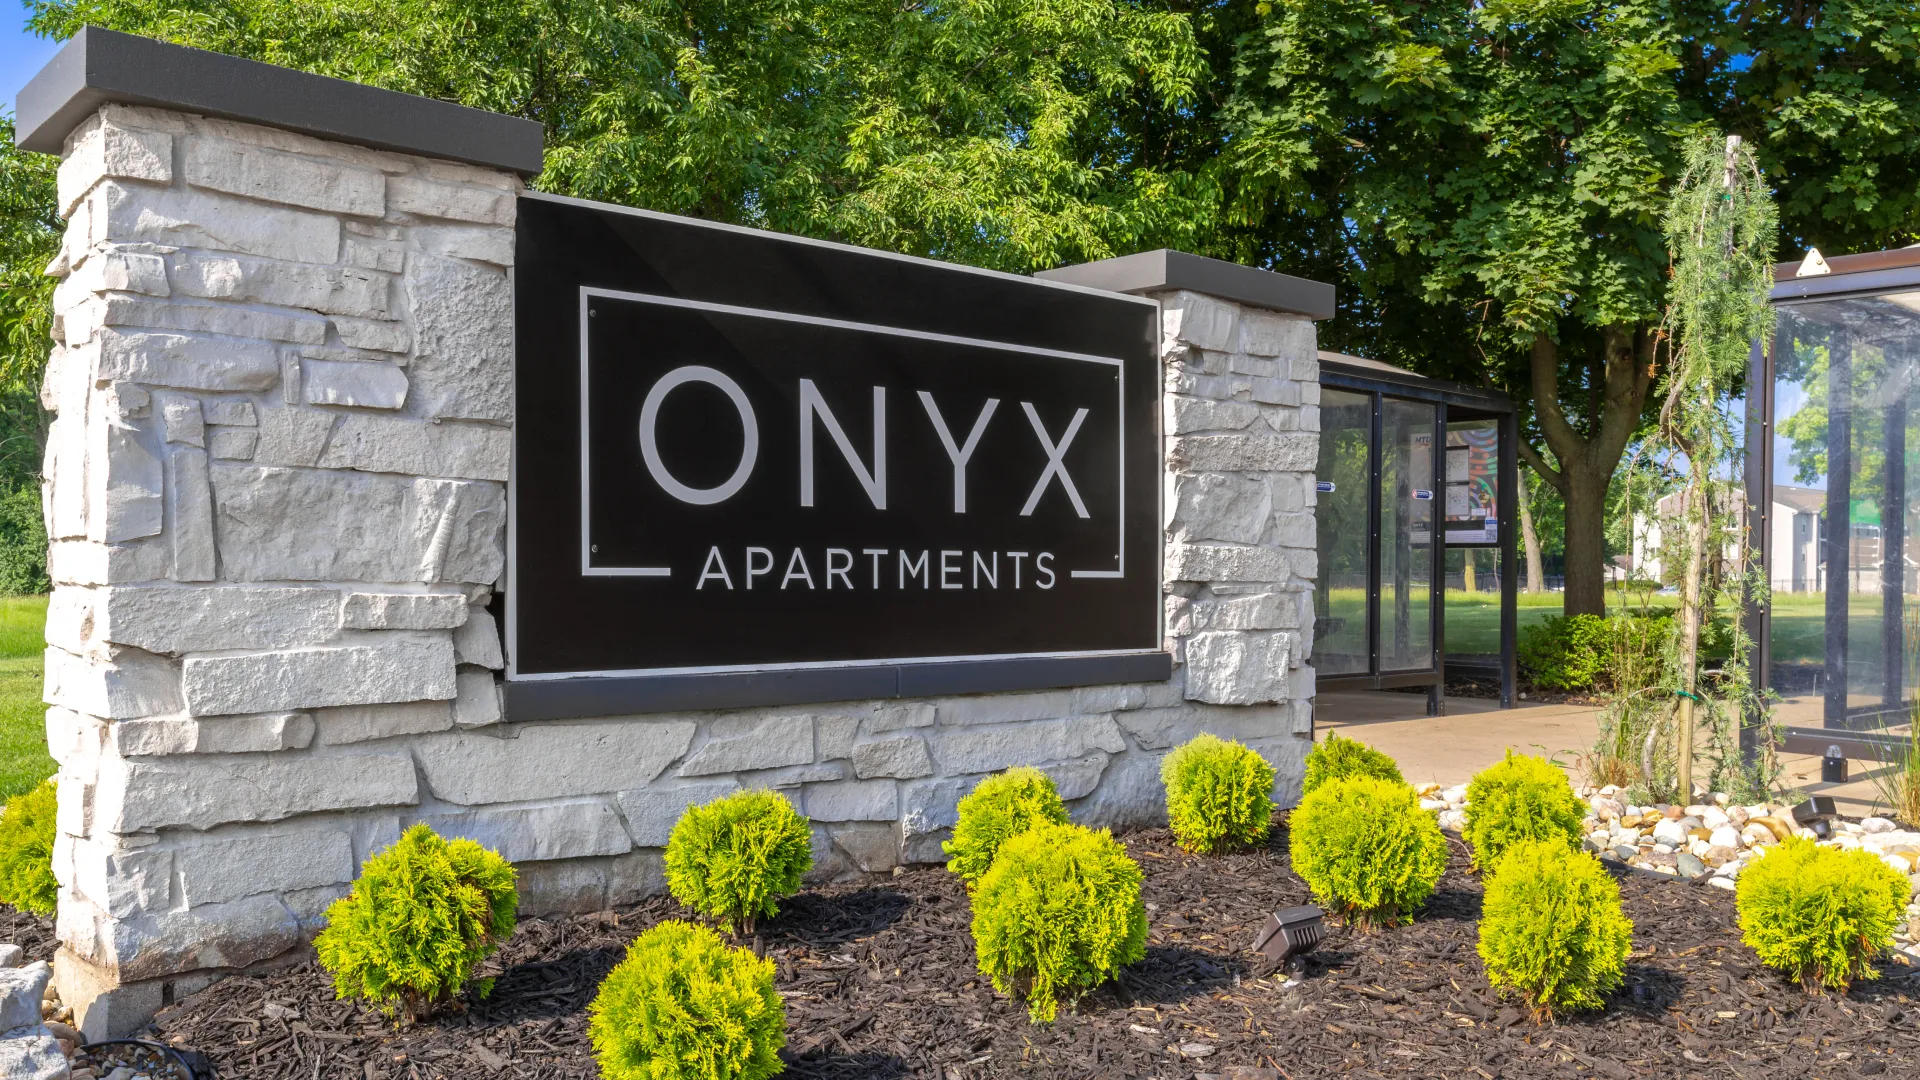 Entrance sign for Onyx Apartments surrounded by lush landscaping and greenery.